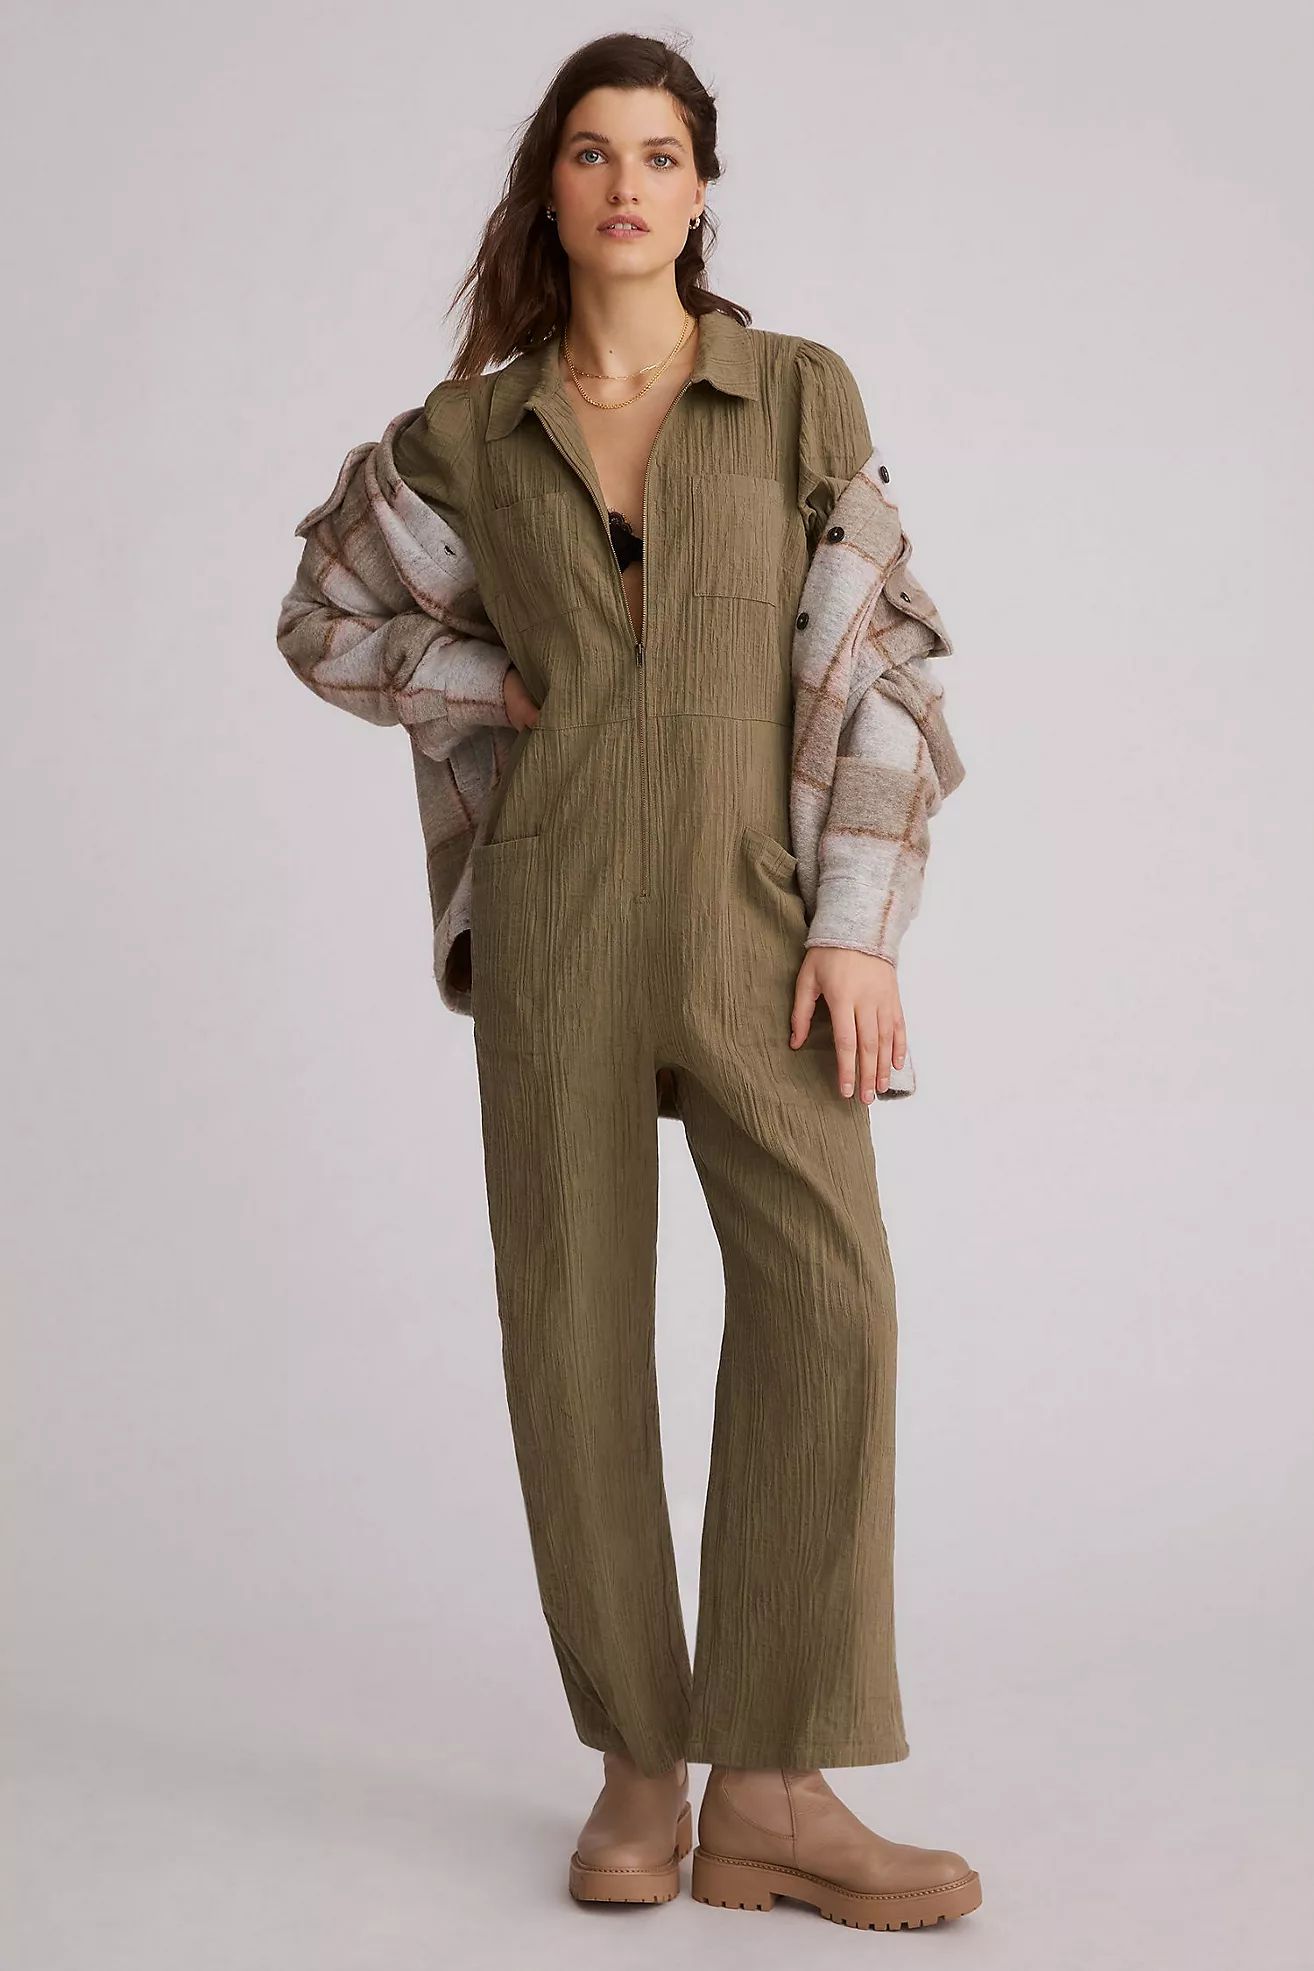 The Odells Tamil Coveralls | Anthropologie (US)